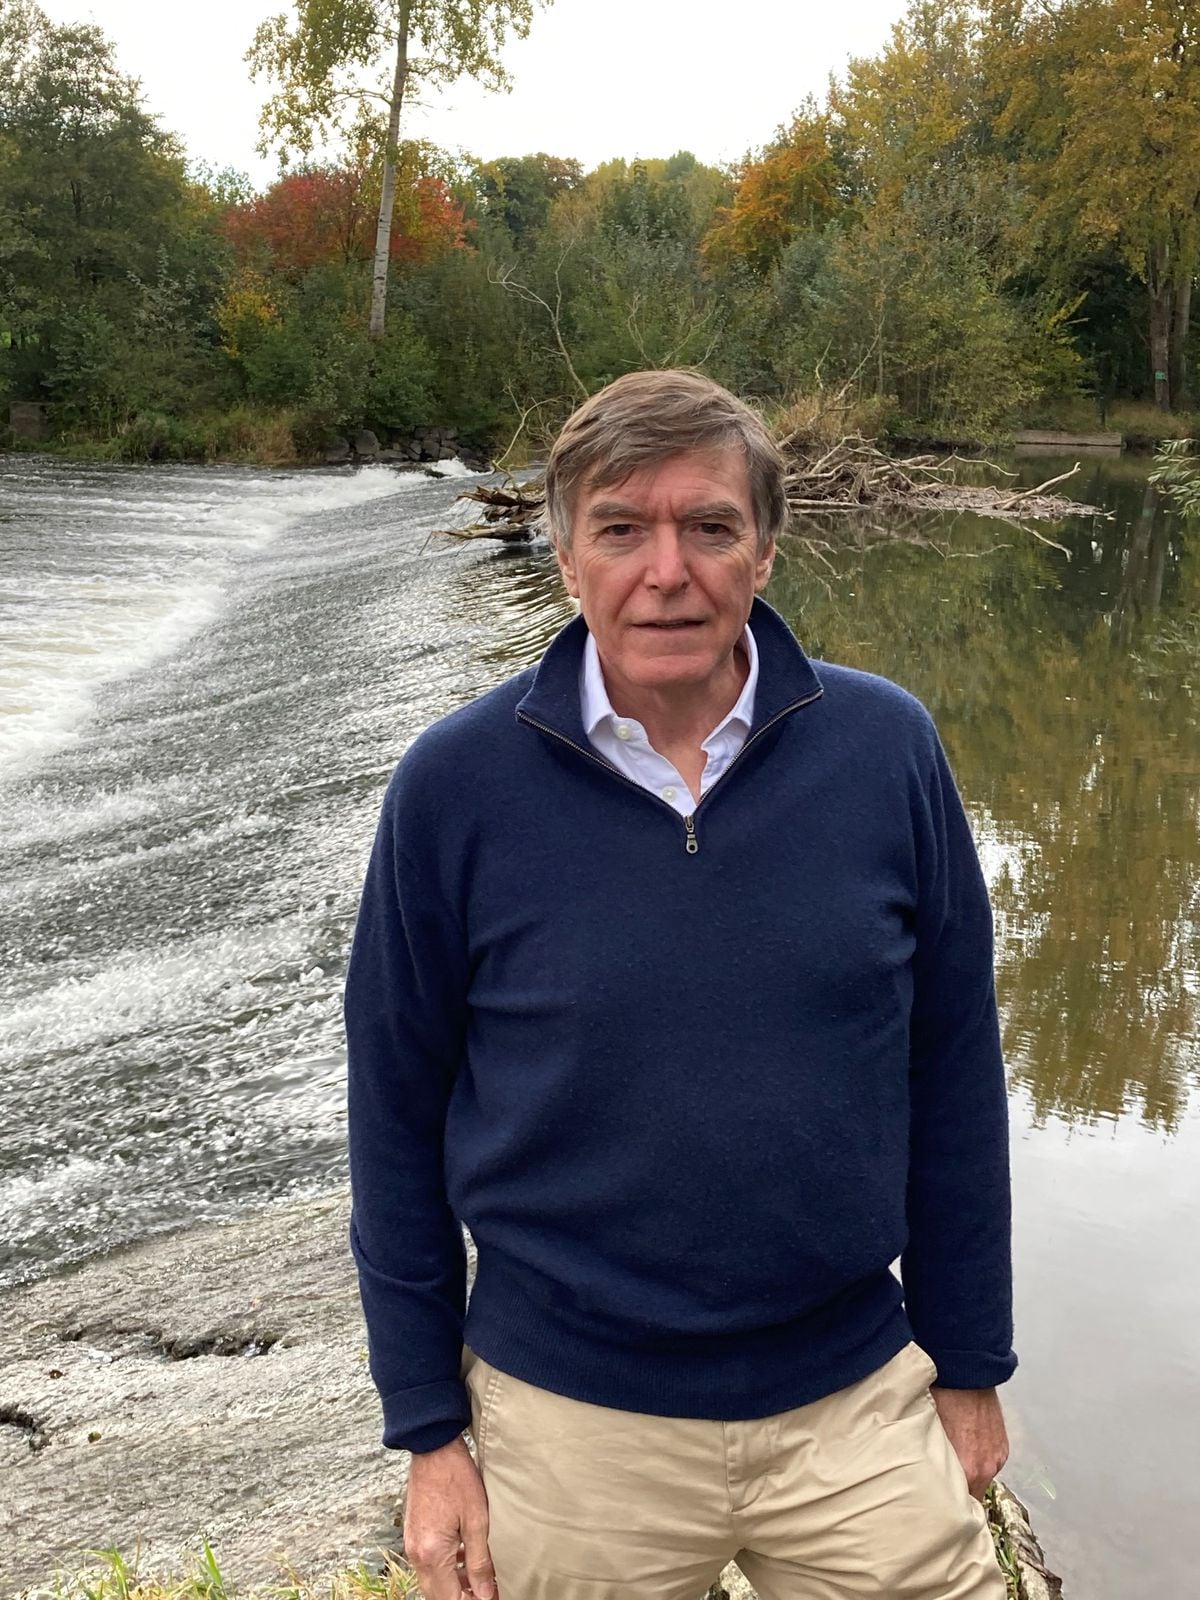 Ludlow MP Philip Dunne at the River Teme